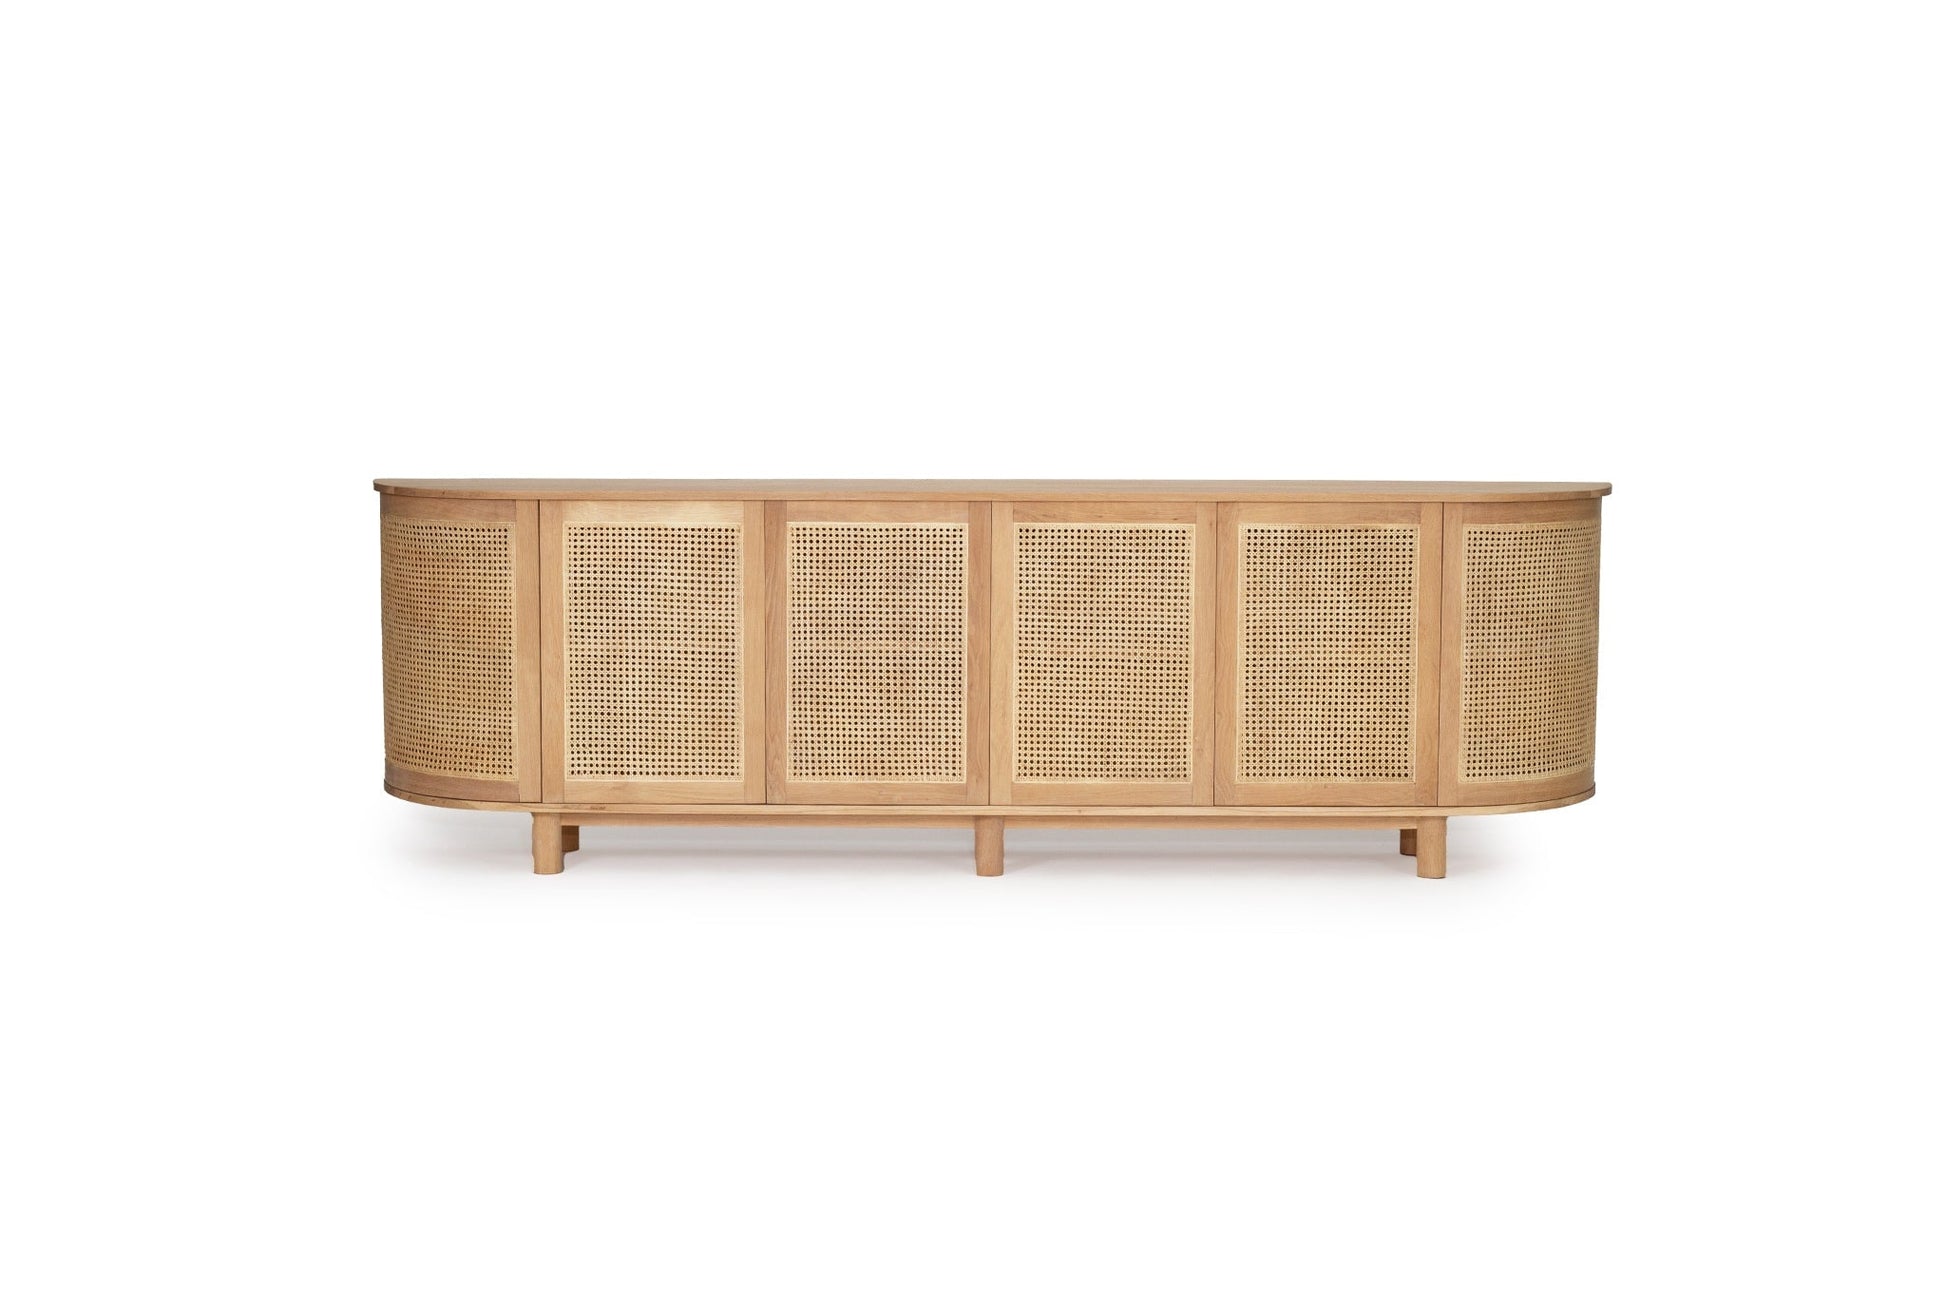 American Oak Curved Rounded Edge Sideboard - Hali - 2 Sizes Sun Republic 